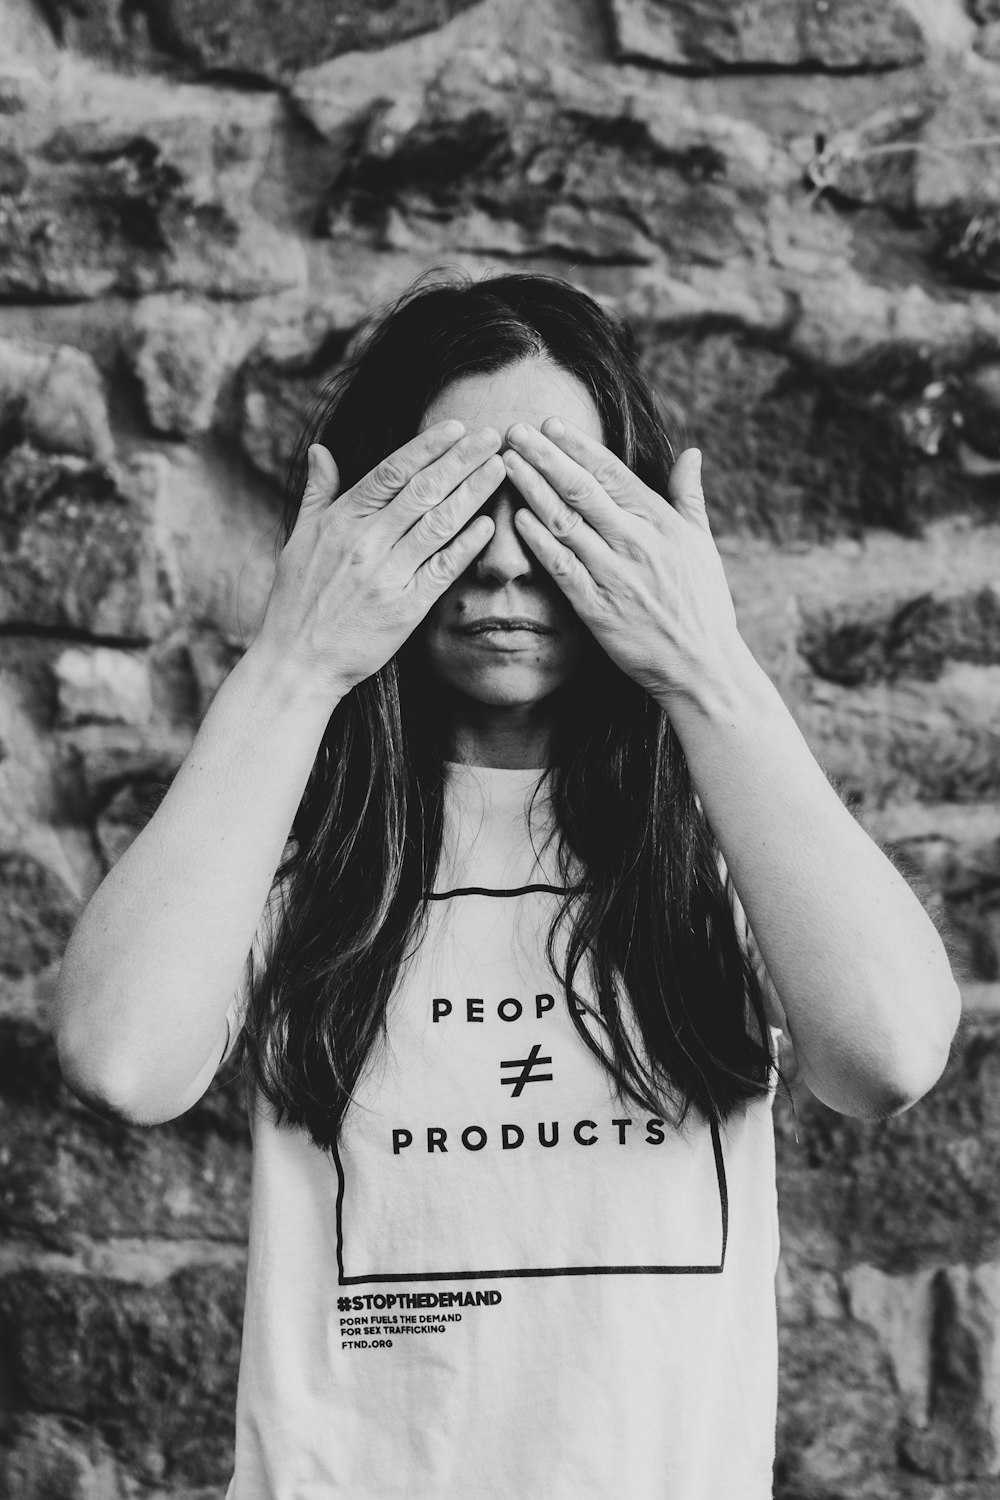 Cute Girls - woman covering her face with her hands photo â€“ Free Slavery Image on  Unsplash